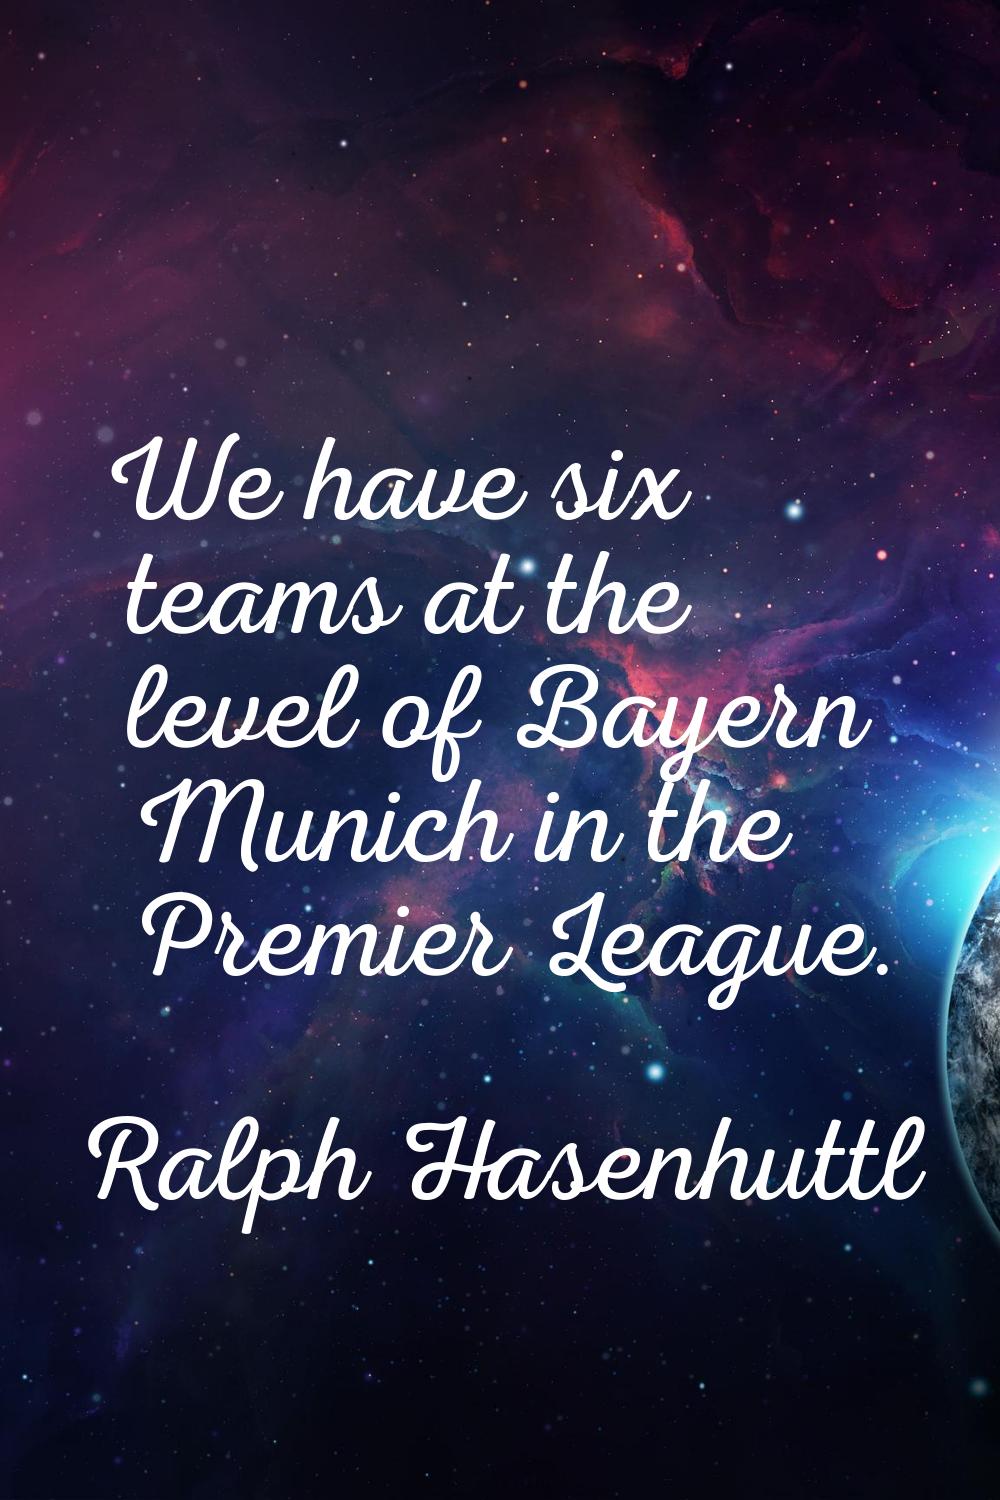 We have six teams at the level of Bayern Munich in the Premier League.